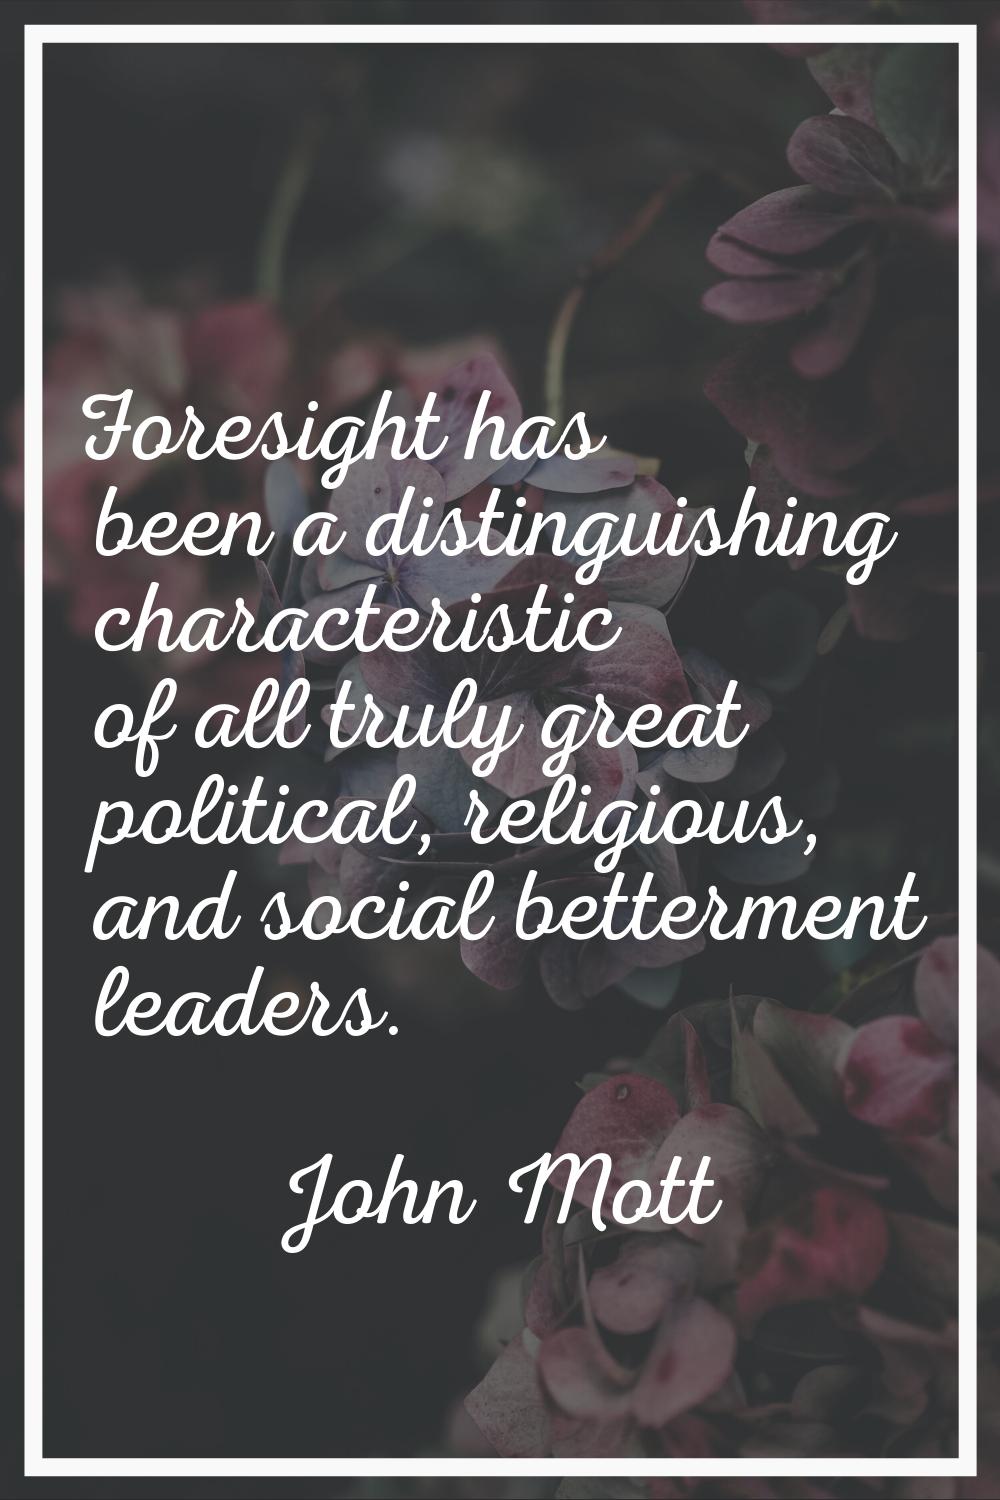 Foresight has been a distinguishing characteristic of all truly great political, religious, and soc